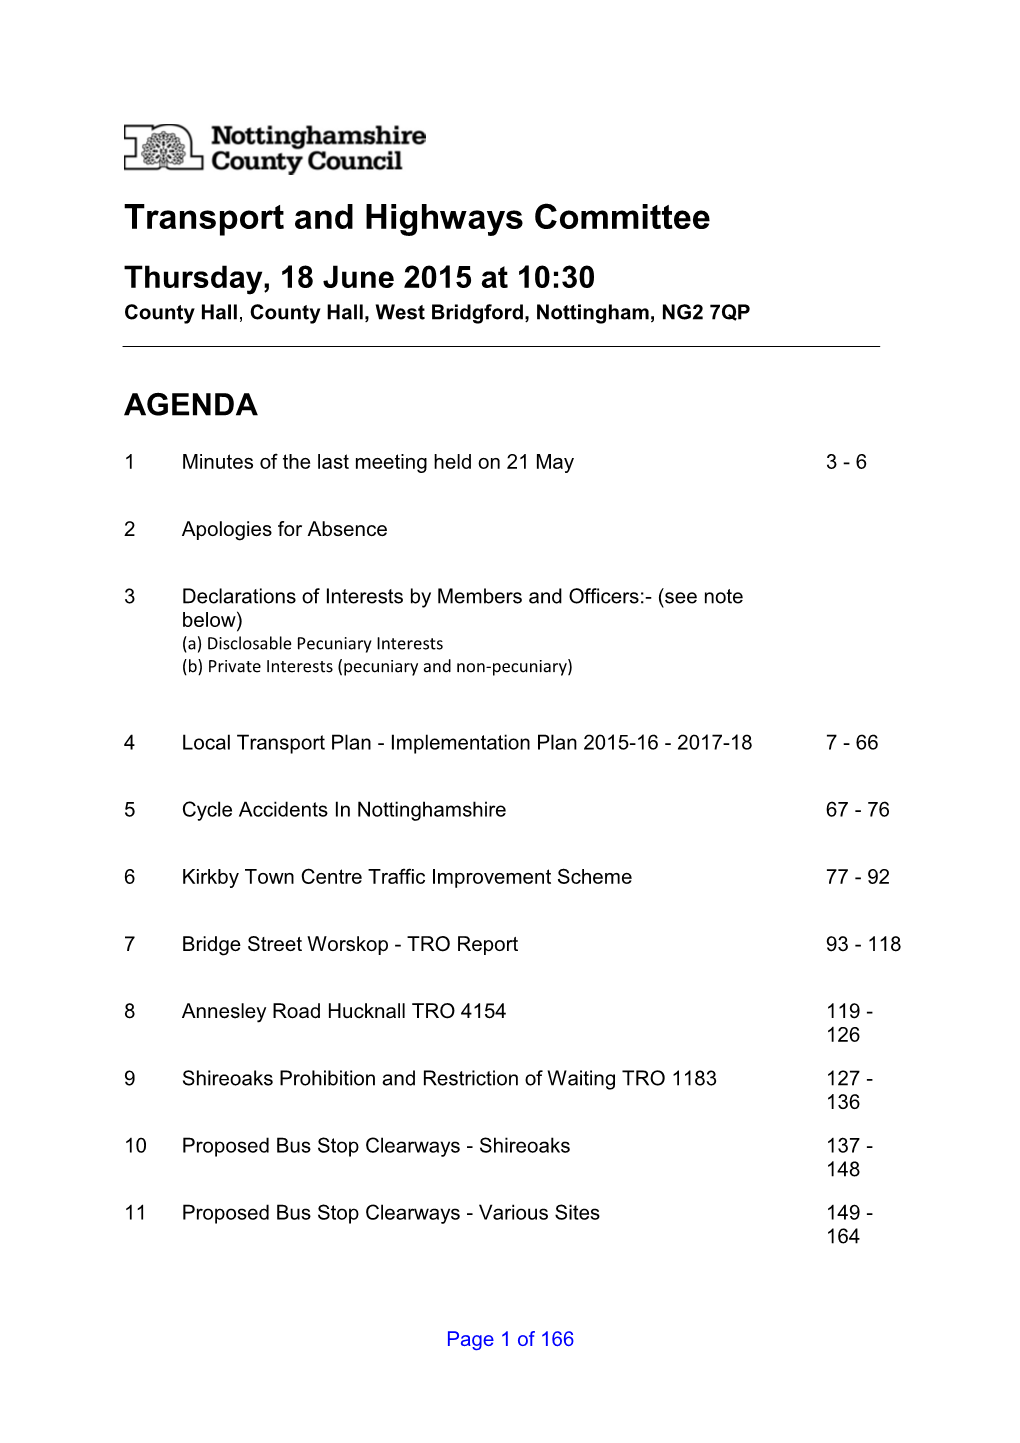 Transport and Highways Committee Thursday, 18 June 2015 at 10:30 County Hall , County Hall, West Bridgford, Nottingham, NG2 7QP